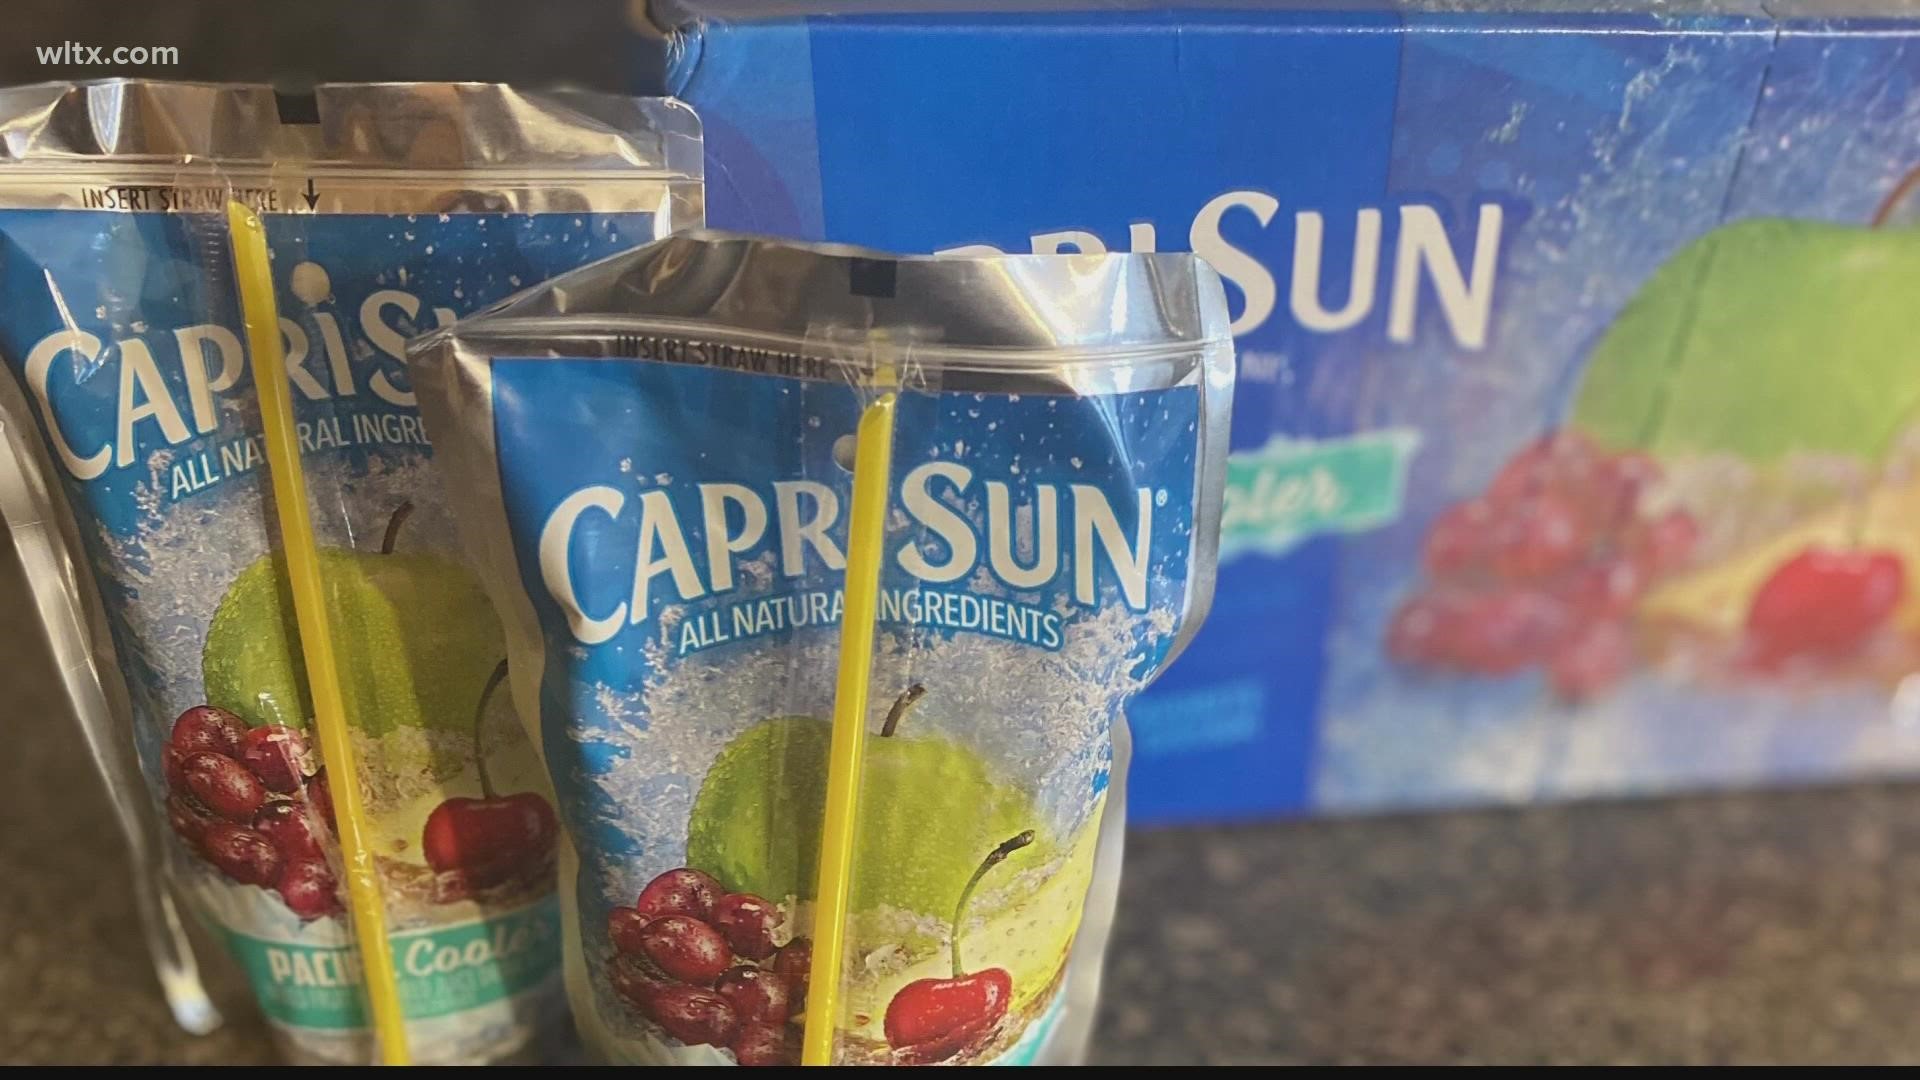 Thousands of cases of wild cherry Capri Sun are being recalled due to cleaning solution possibly being mixed into the popular children's beverage.